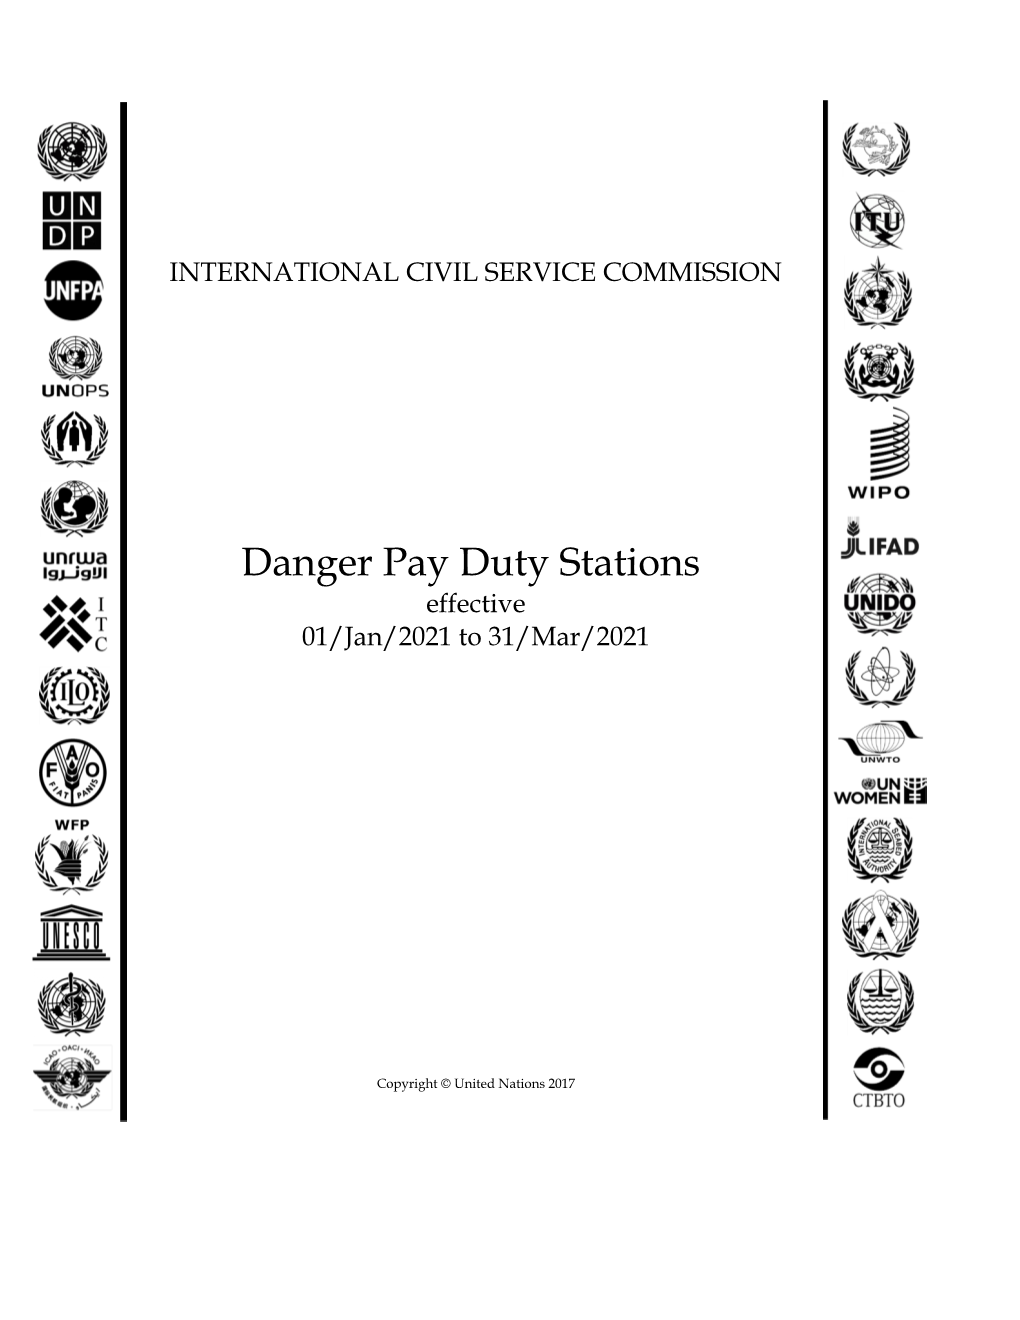 Danger Pay Duty Stations Effective 01/Jan/2021 to 31/Mar/2021